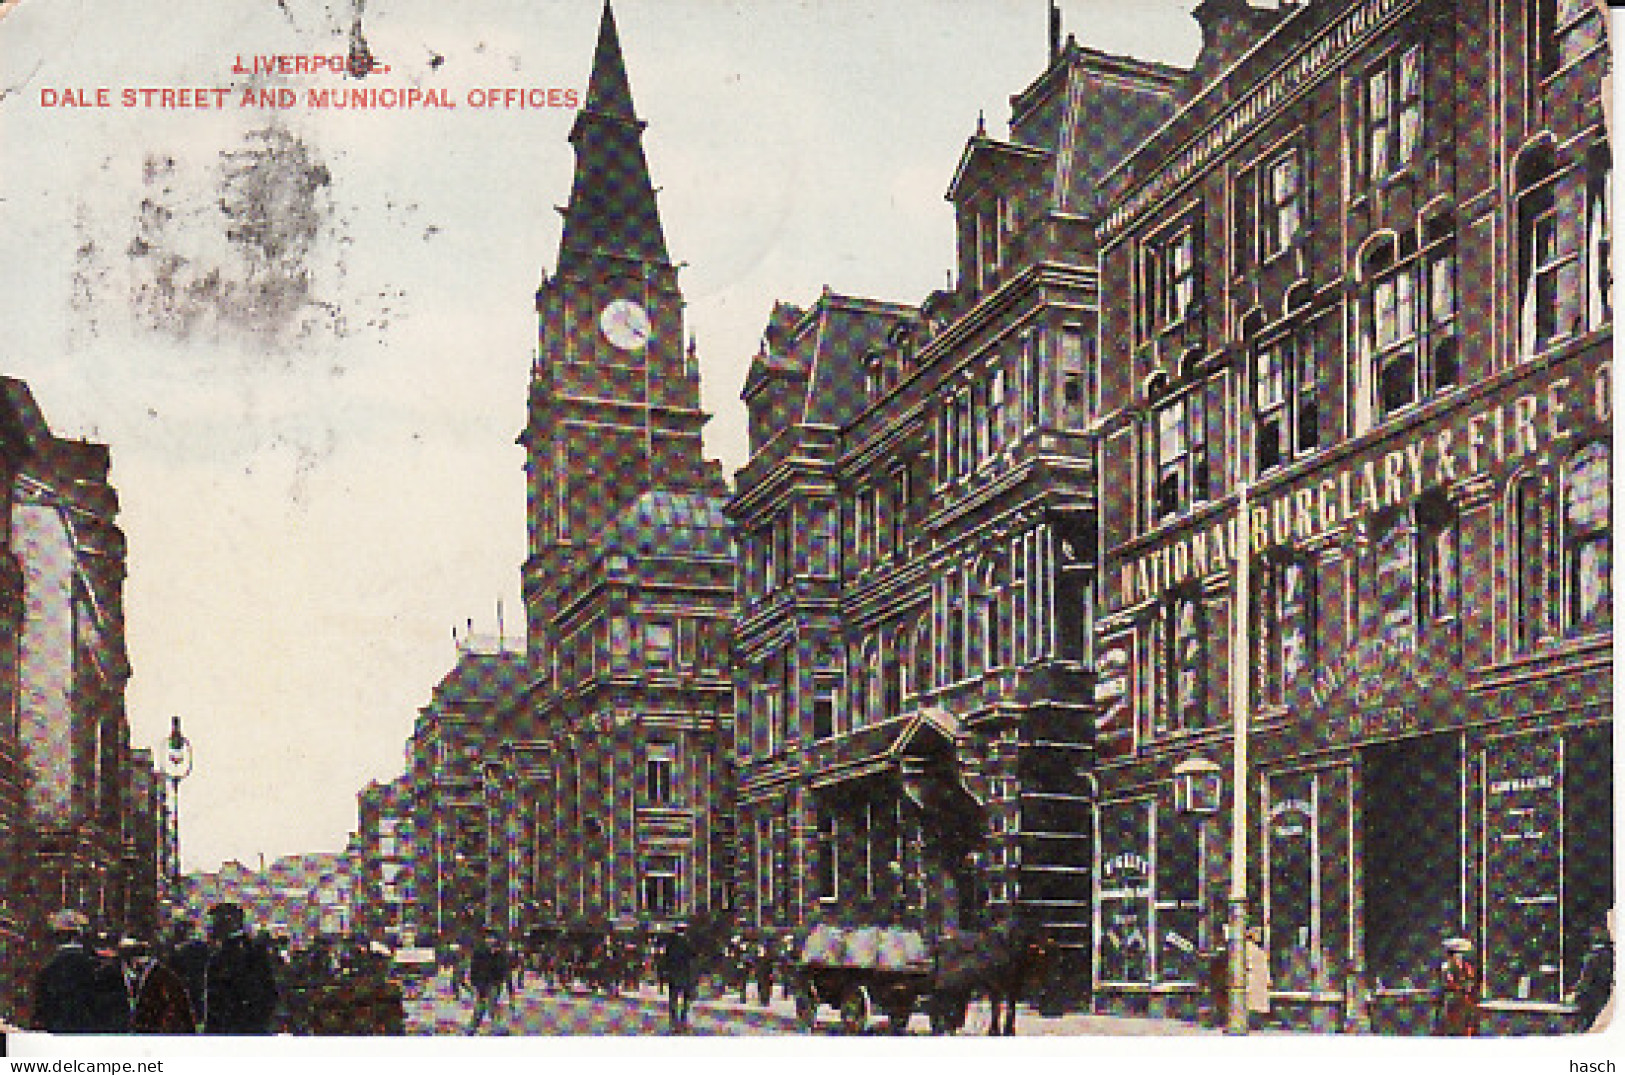 28113Liverpool, Dale Street And Municipal Offices (1909) (see Corners) - Liverpool